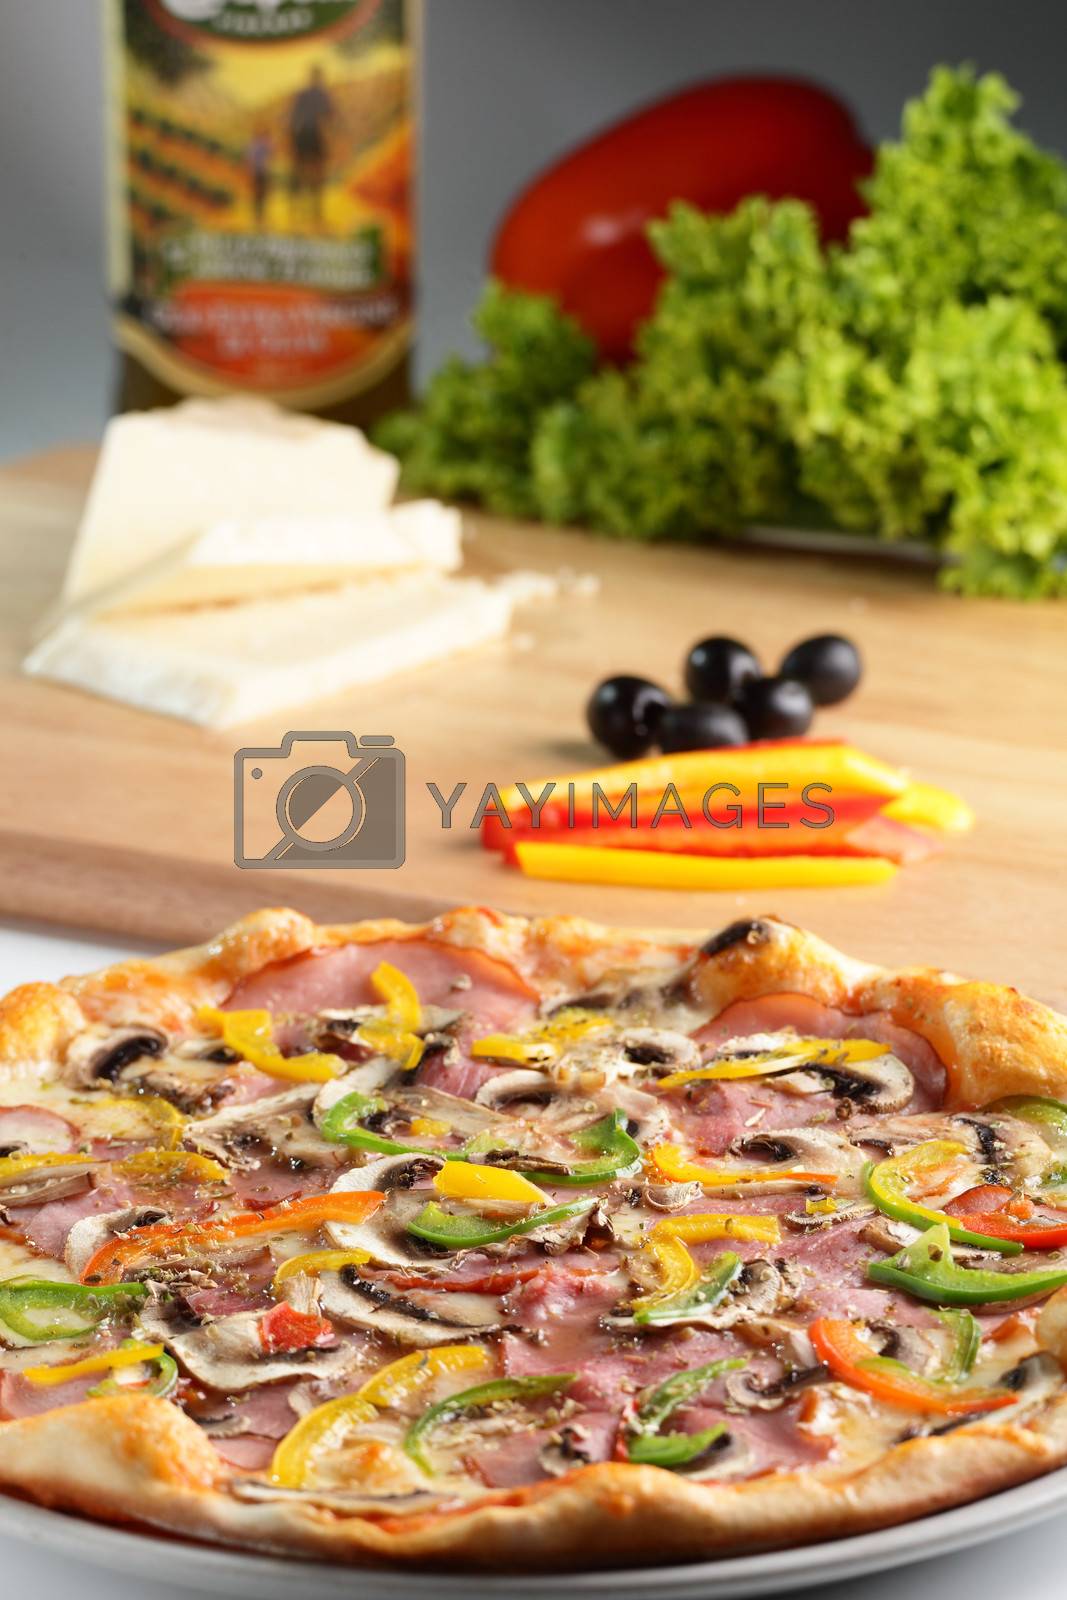 Royalty free image of hot pizza and tasty pizza by fiphoto